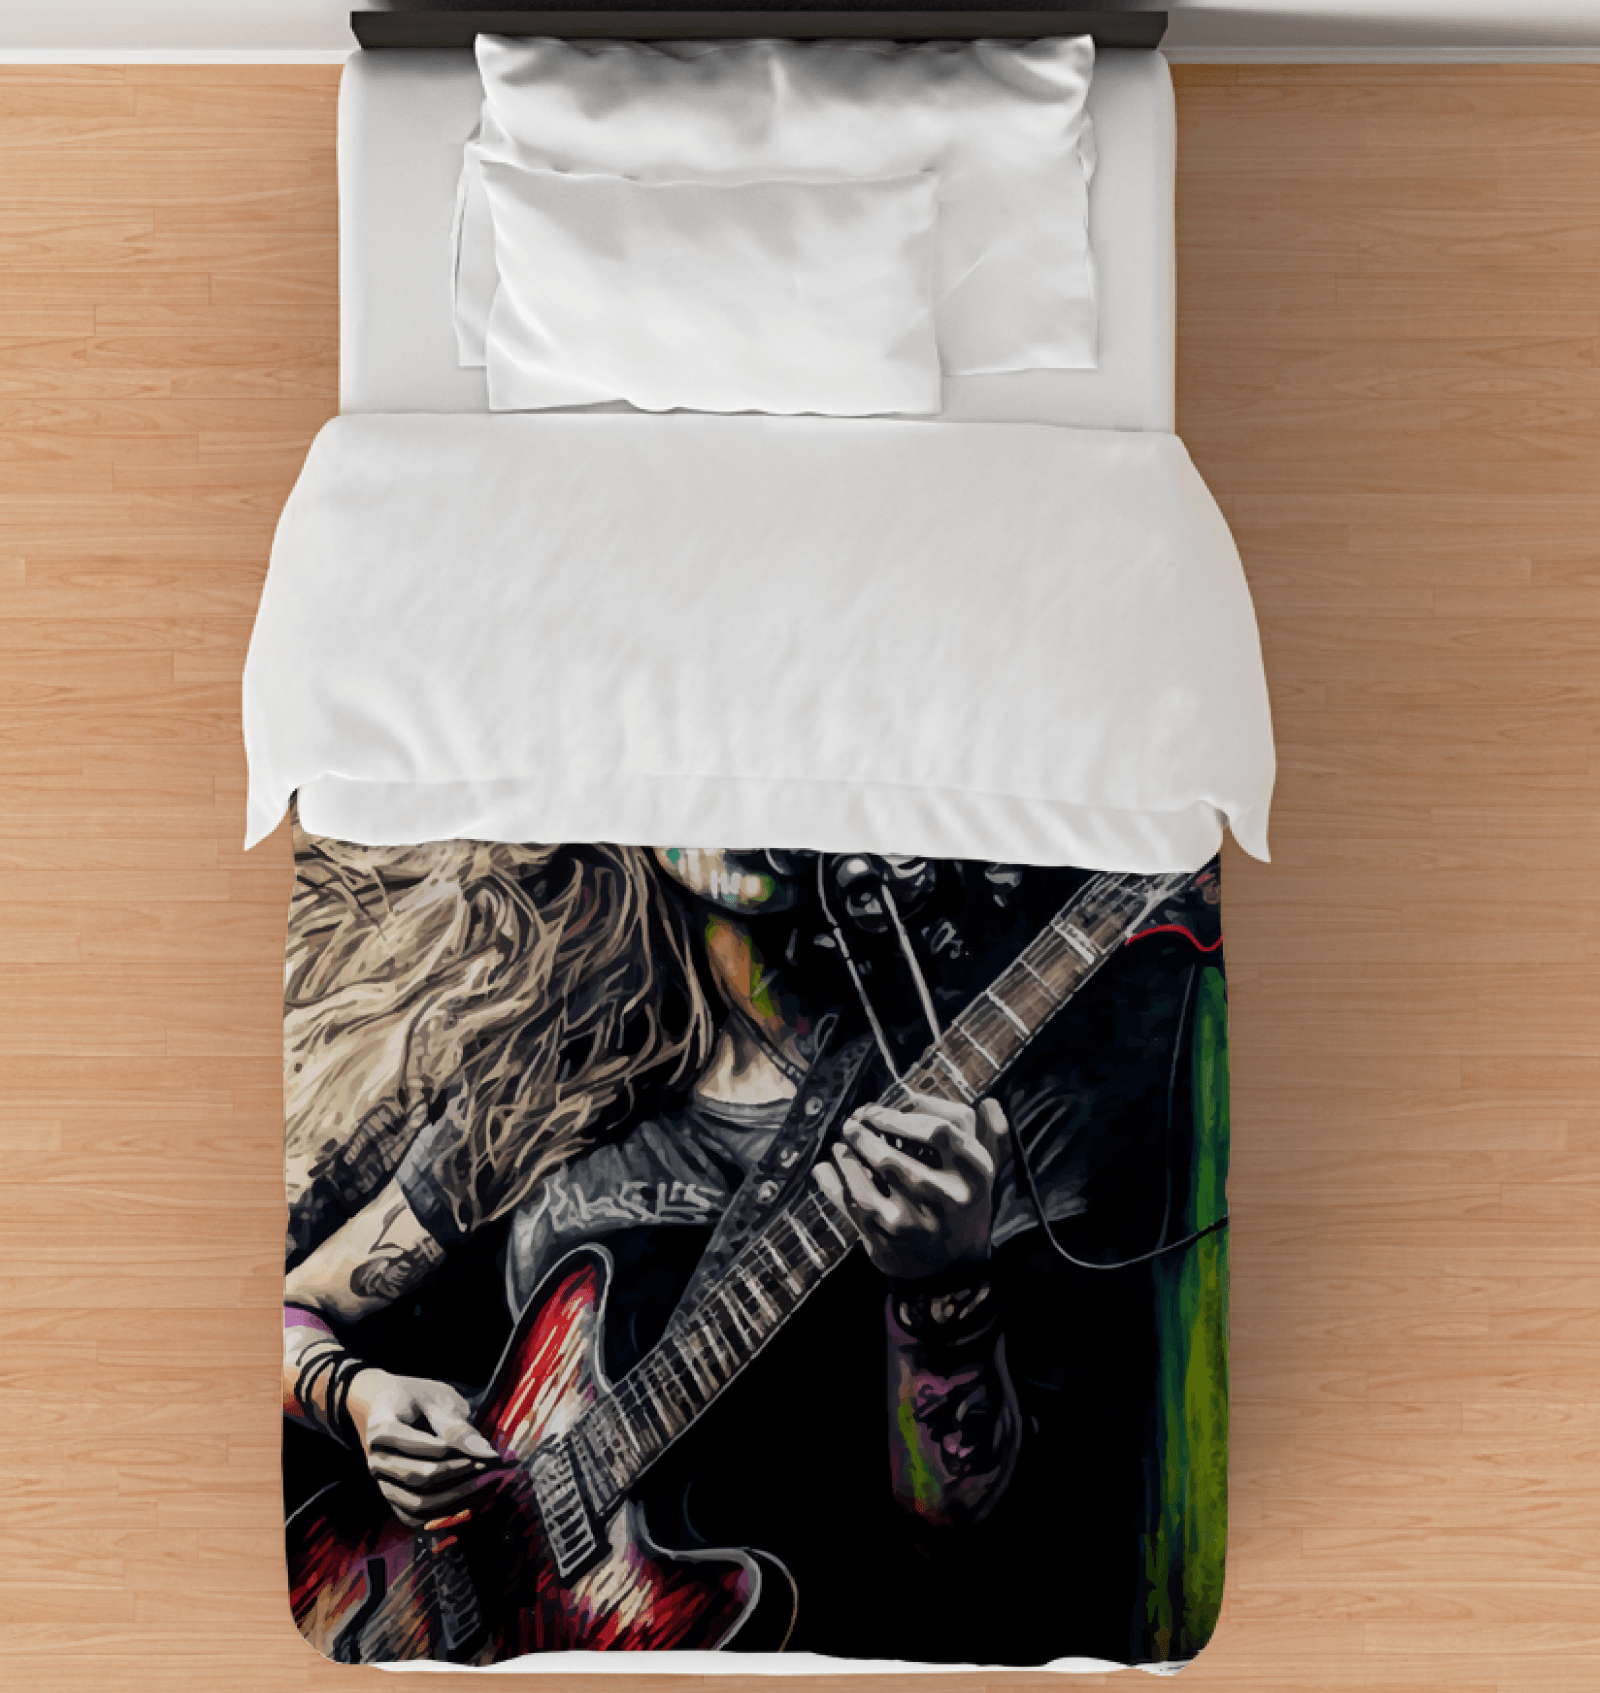 Her Music Soothes Souls Duvet Cover - Beyond T-shirts